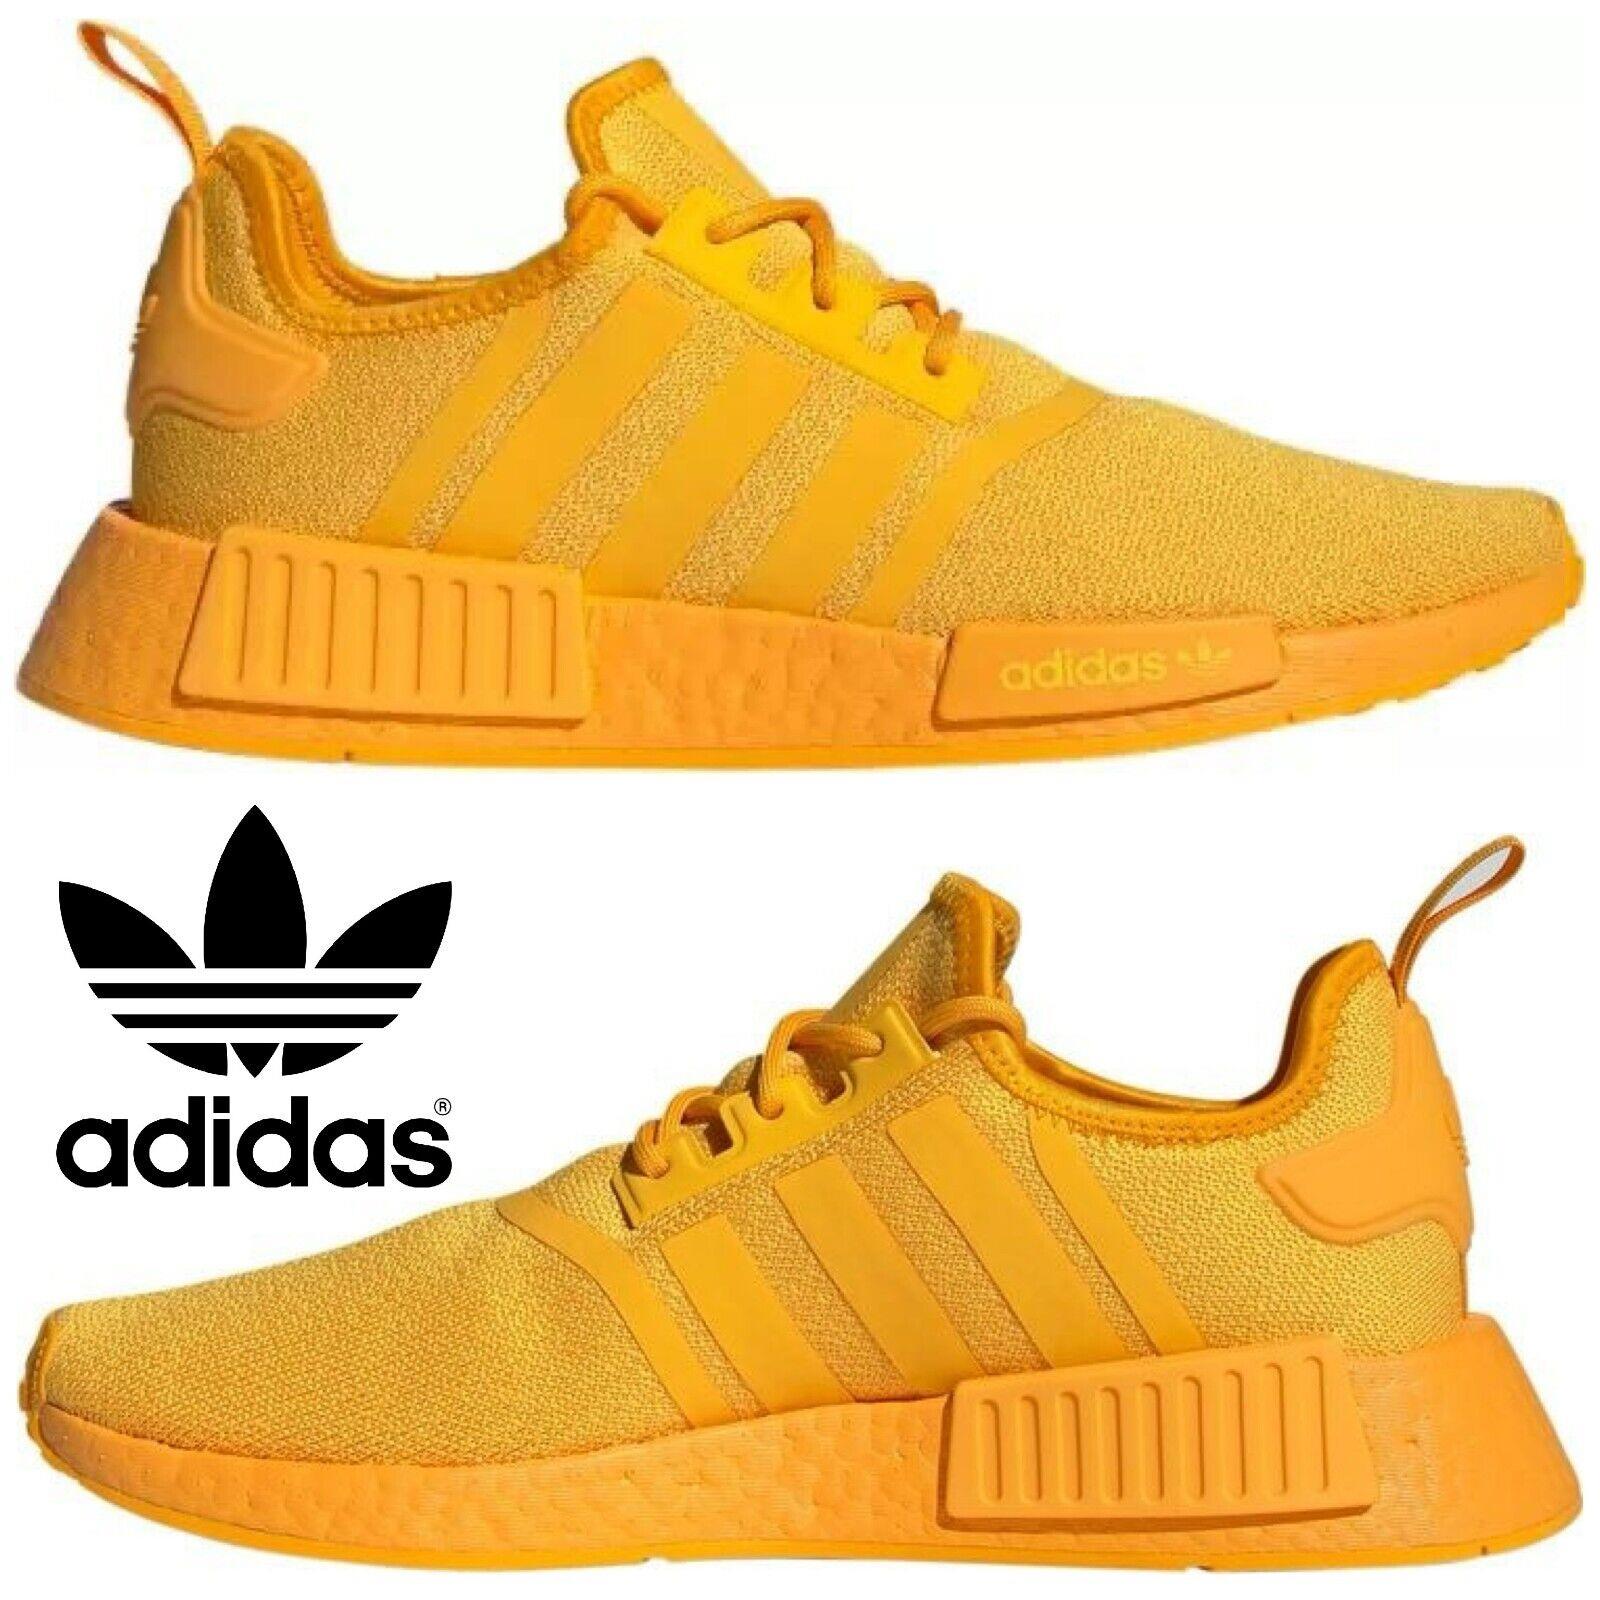 Adidas Originals Nmd R1 Men`s Sneakers Running Shoes Gym Casual Sport Gold